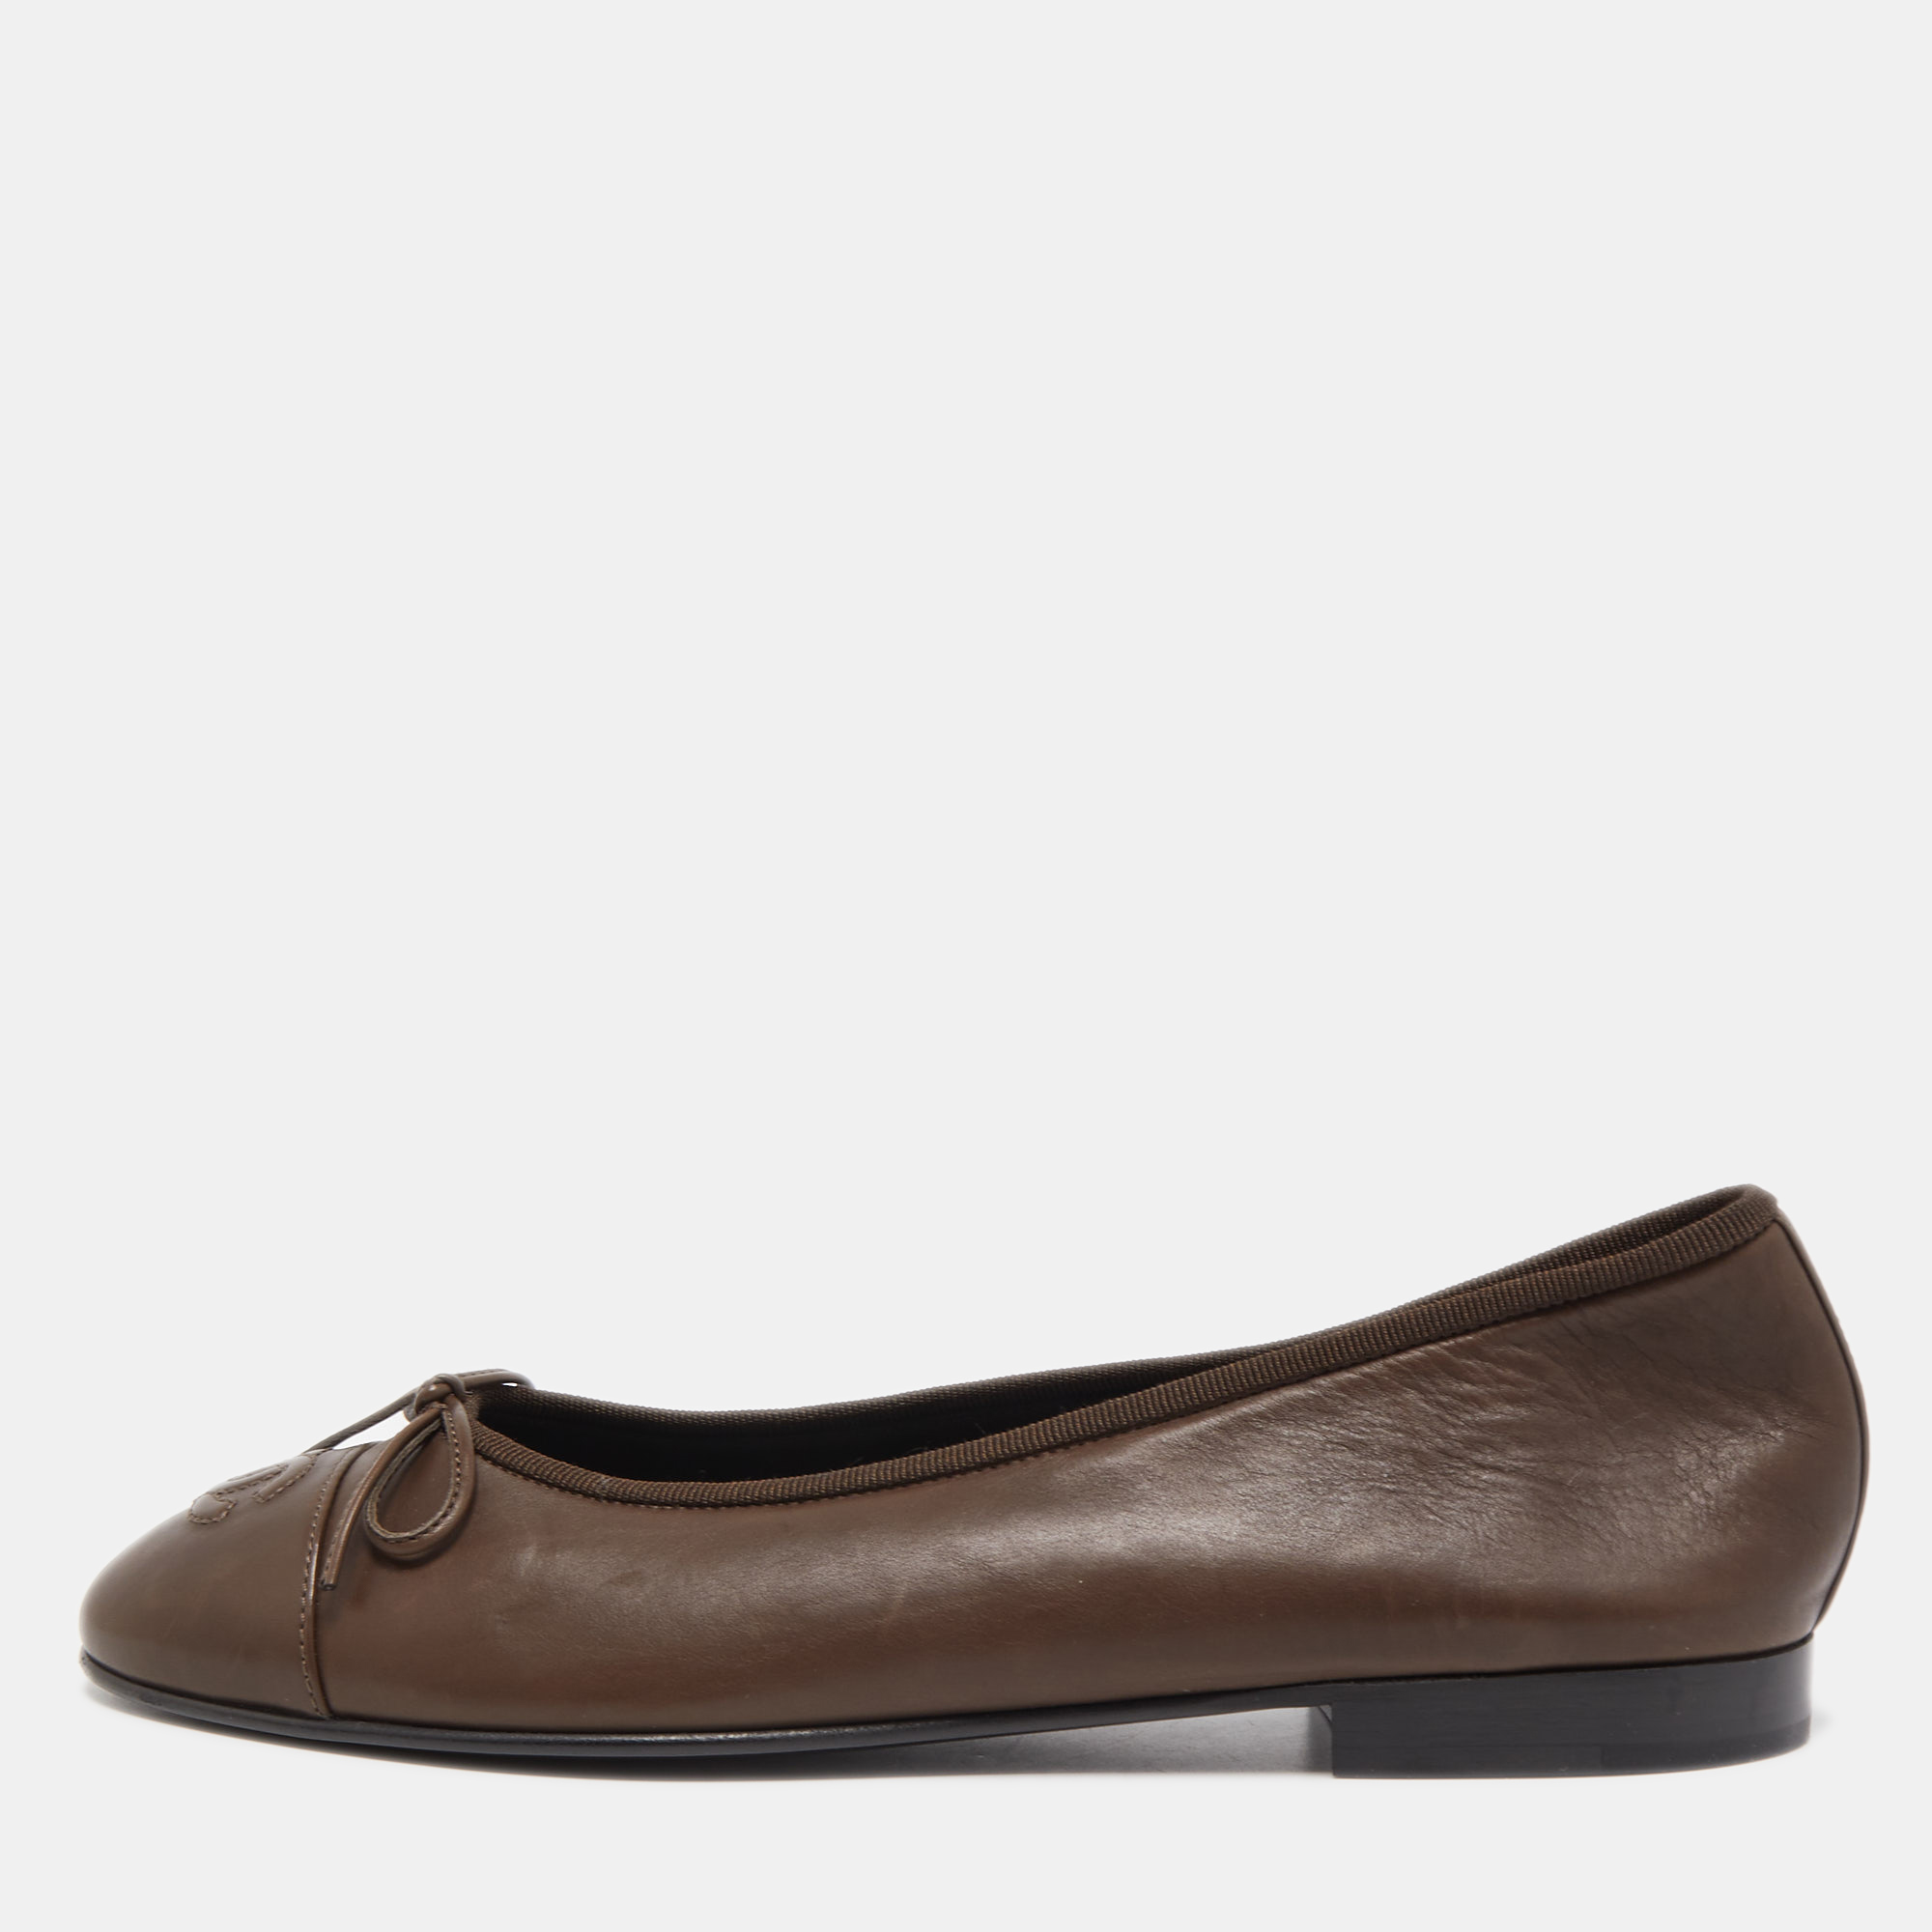 Chanel Brown Two-tone Leather Ballet Flats - Size 38.5 EU/ 8.5 US